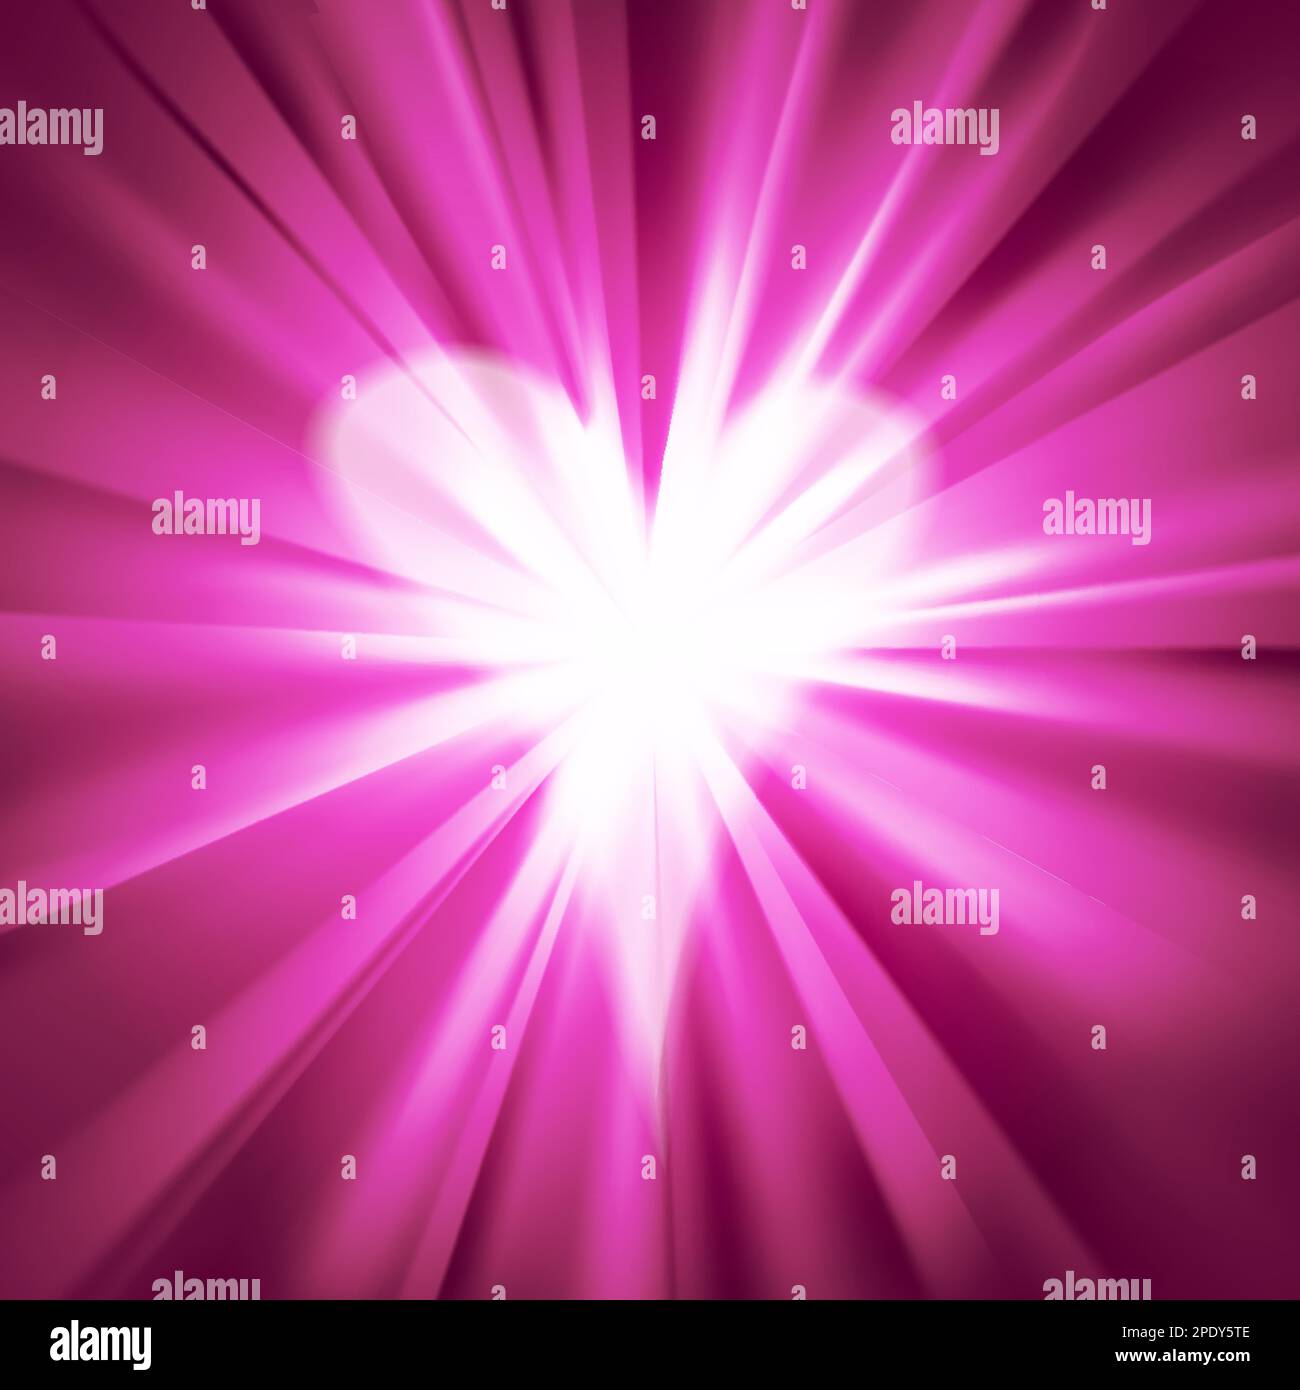 https://c8.alamy.com/comp/2PDY5TE/pink-flare-with-a-heart-abstract-romantic-background-with-glowing-heart-shining-love-and-romance-concept-graphic-element-for-wedding-invitation-bi-2PDY5TE.jpg